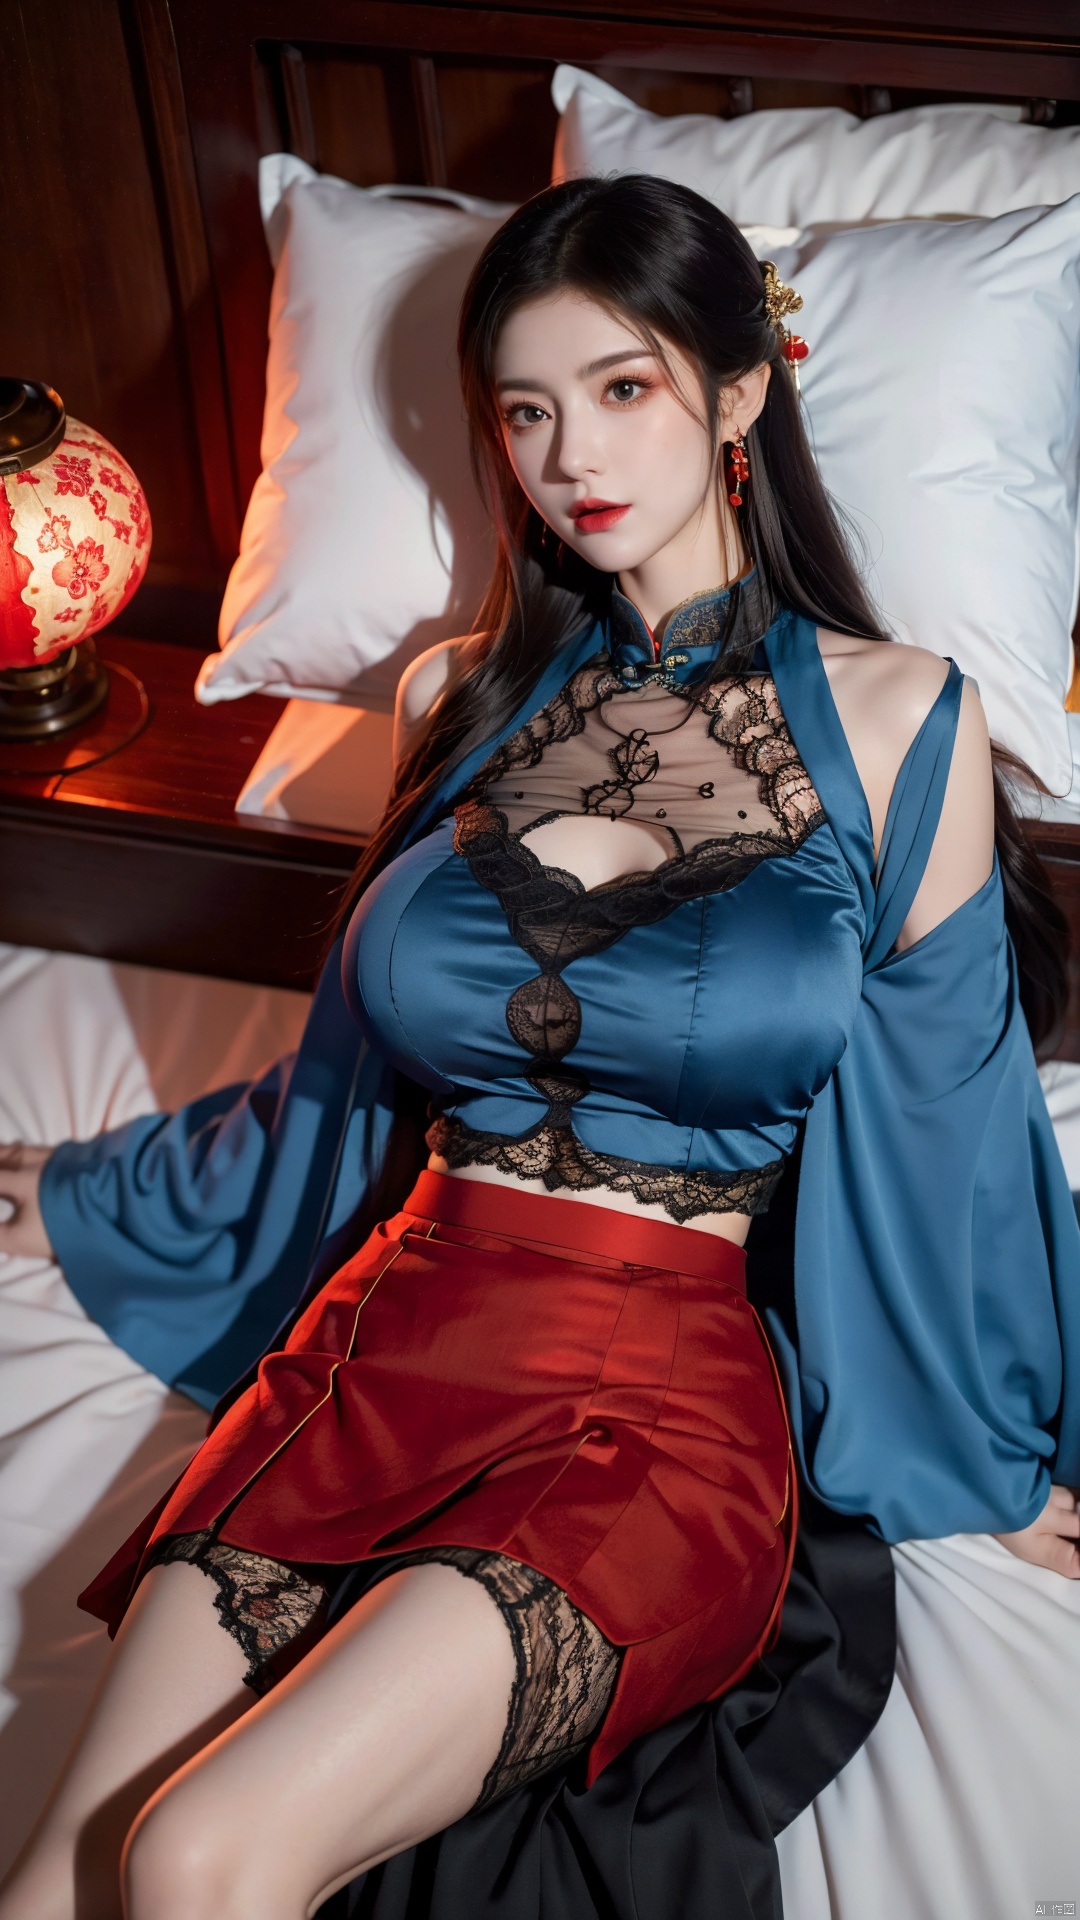  1girl, (Lace red|blue skirt:1.45), on Stomach, lying down, bed,aqua_earrings,Lights, lanterns, chang,(big breasts:1.49),hanfu, antique cheongsam, Chinese round fans,